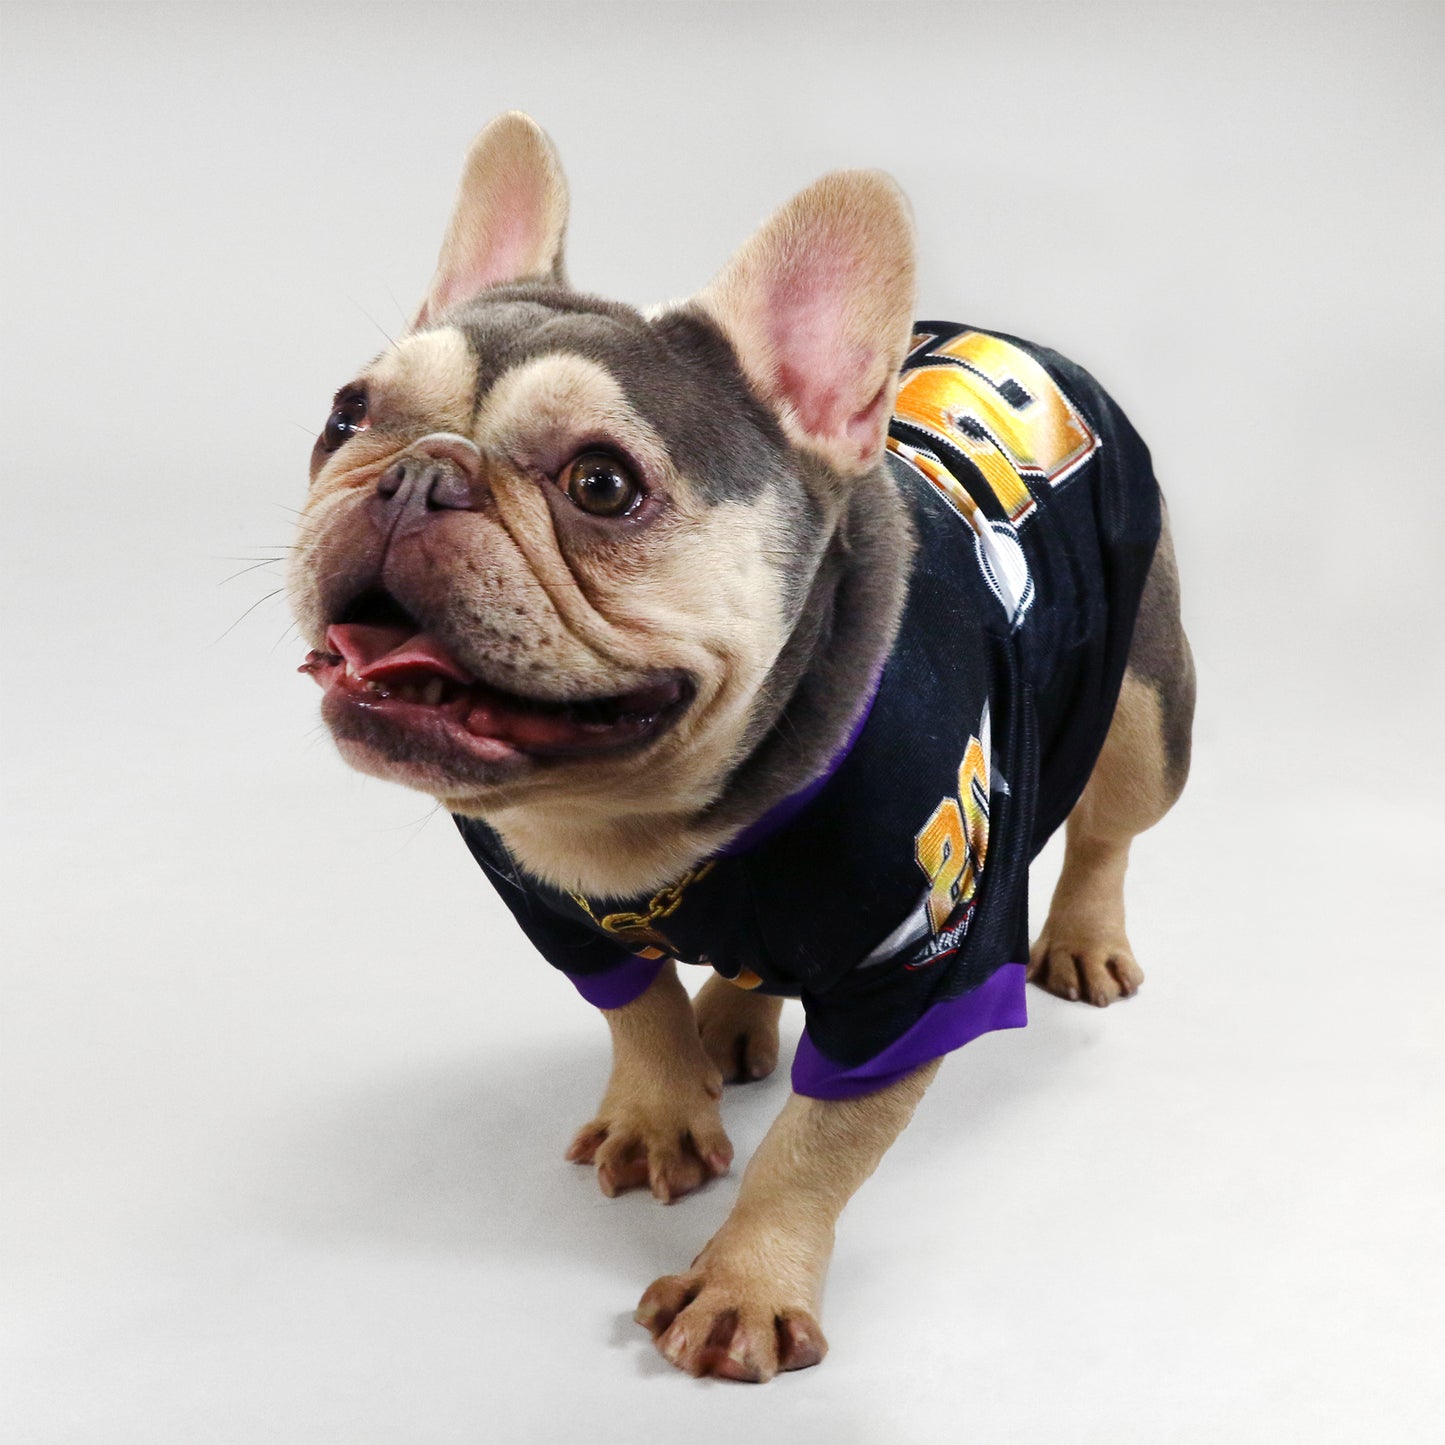 Chunky Monkey the French Bulldog wearing the Off The Chain Deluxe Pet Jersey in size Medium.